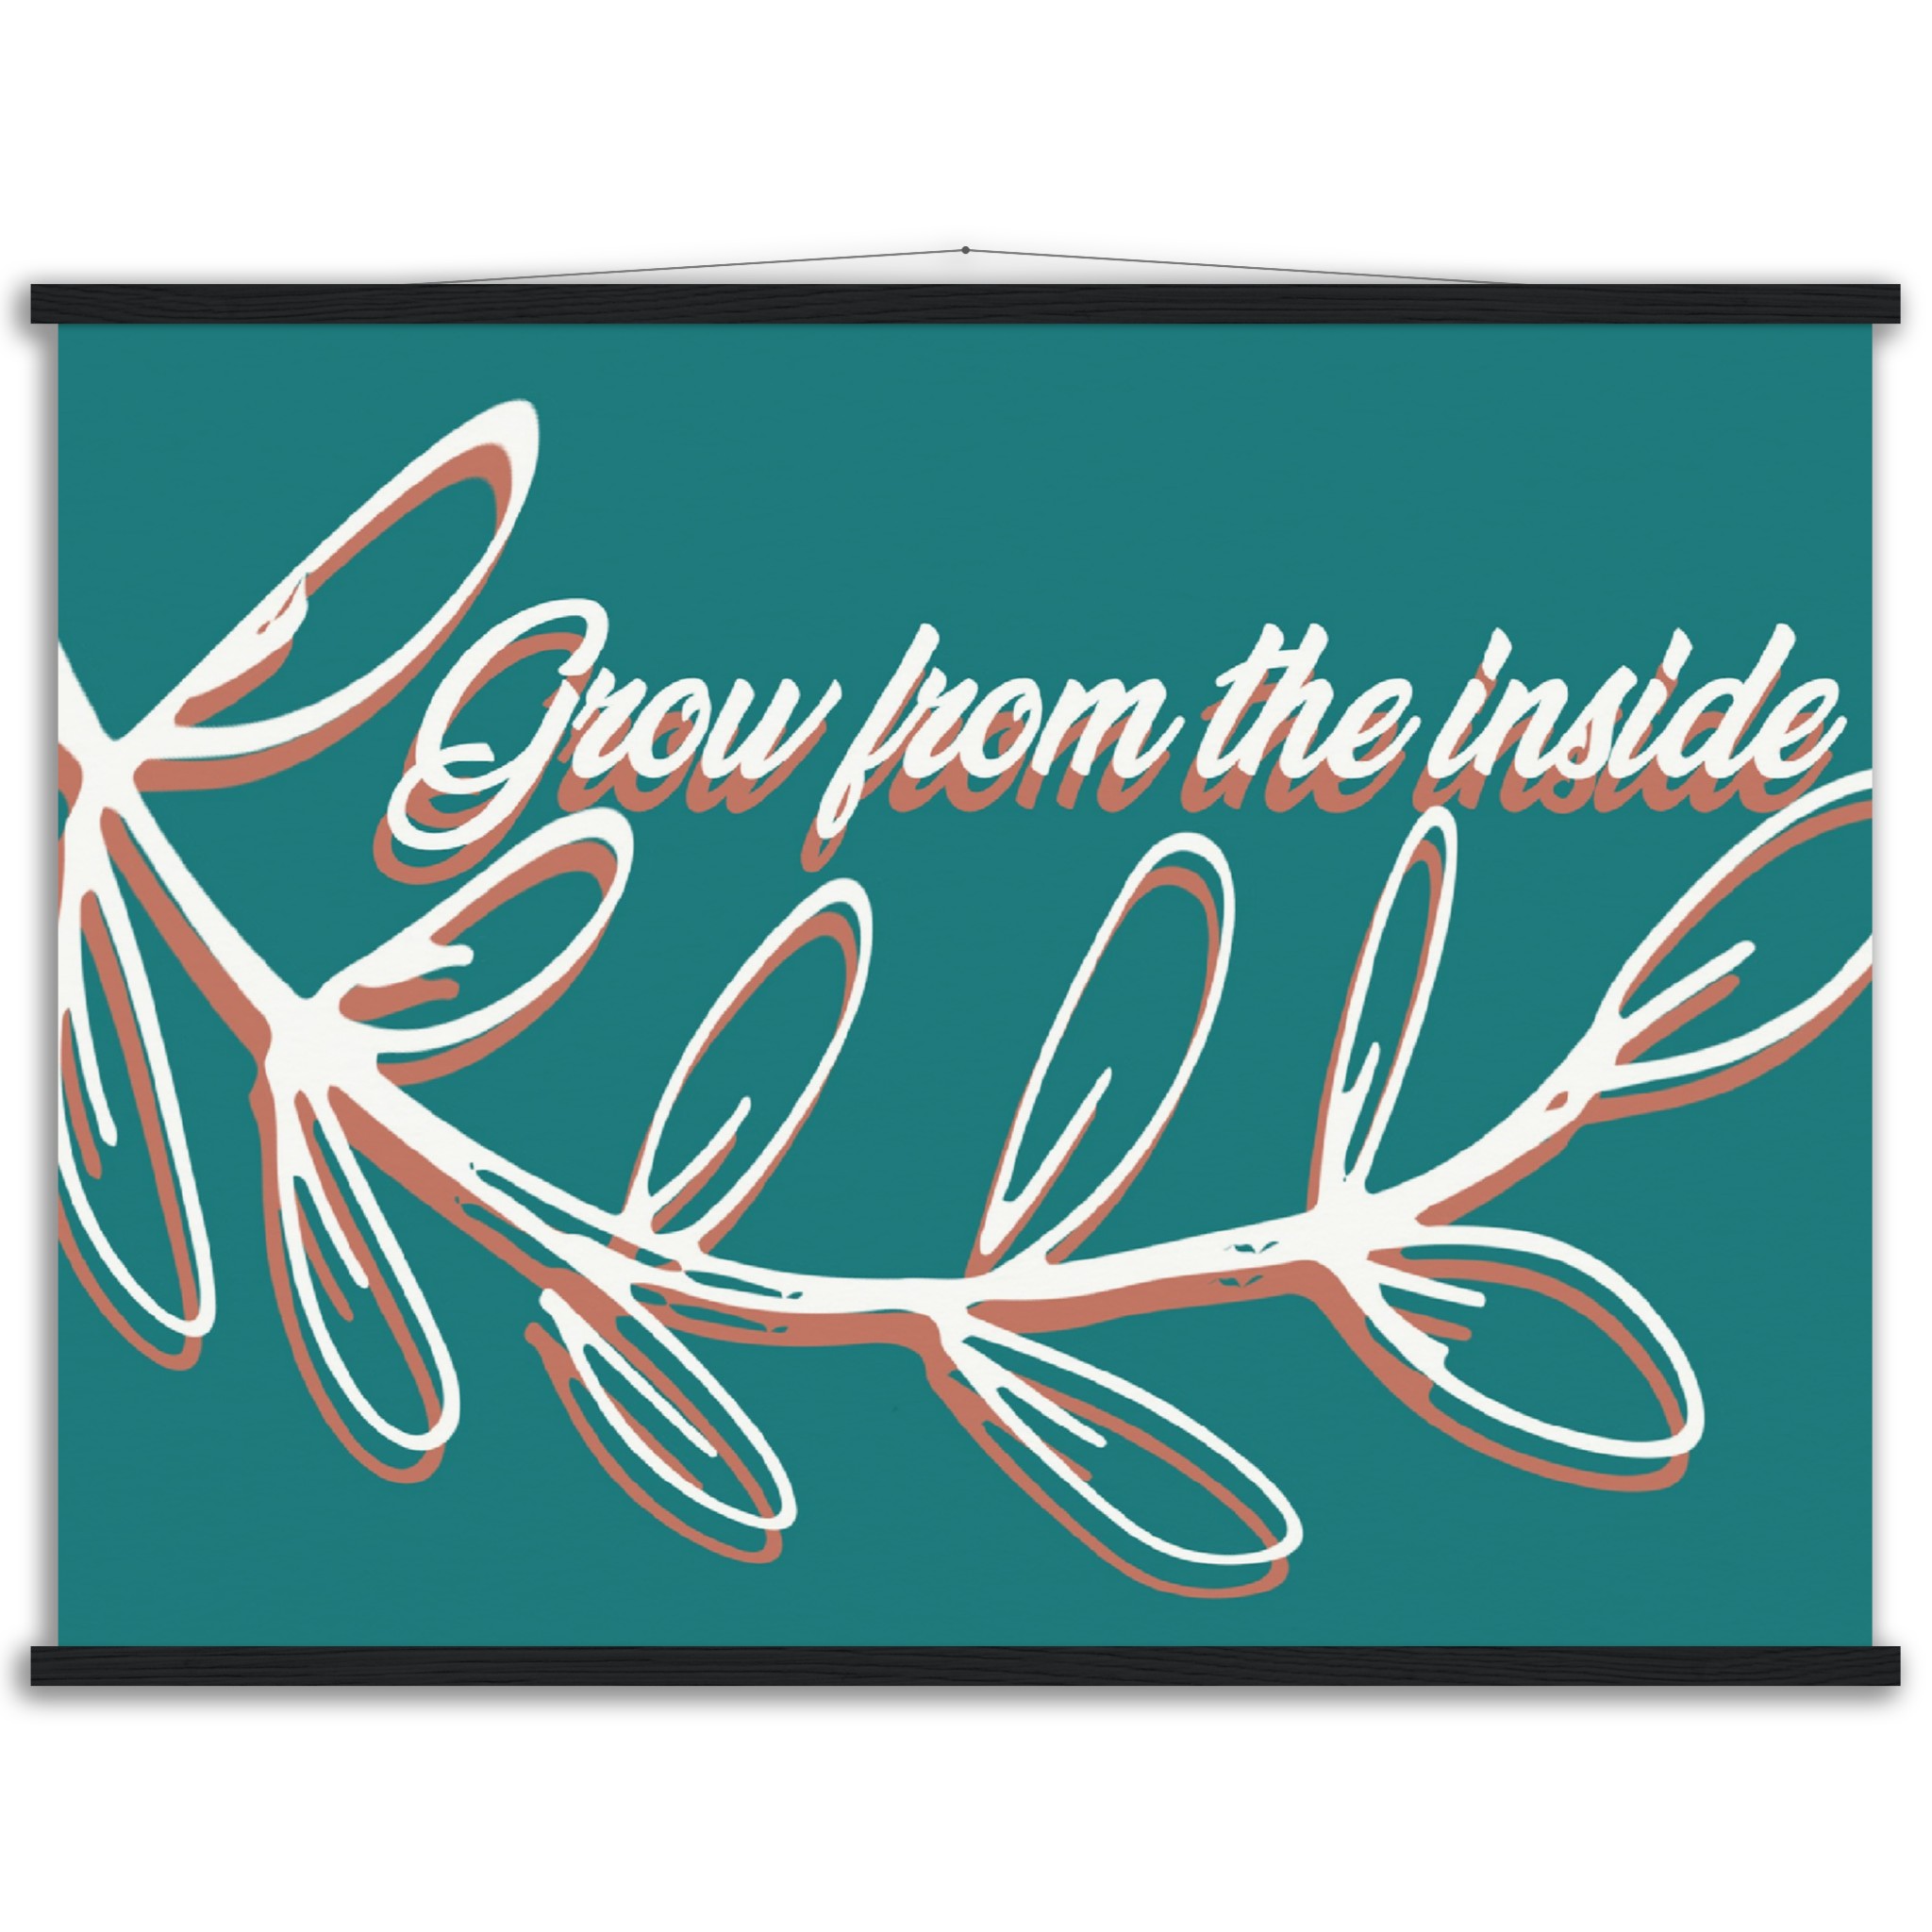 ‘Grow from the inside’ wall art